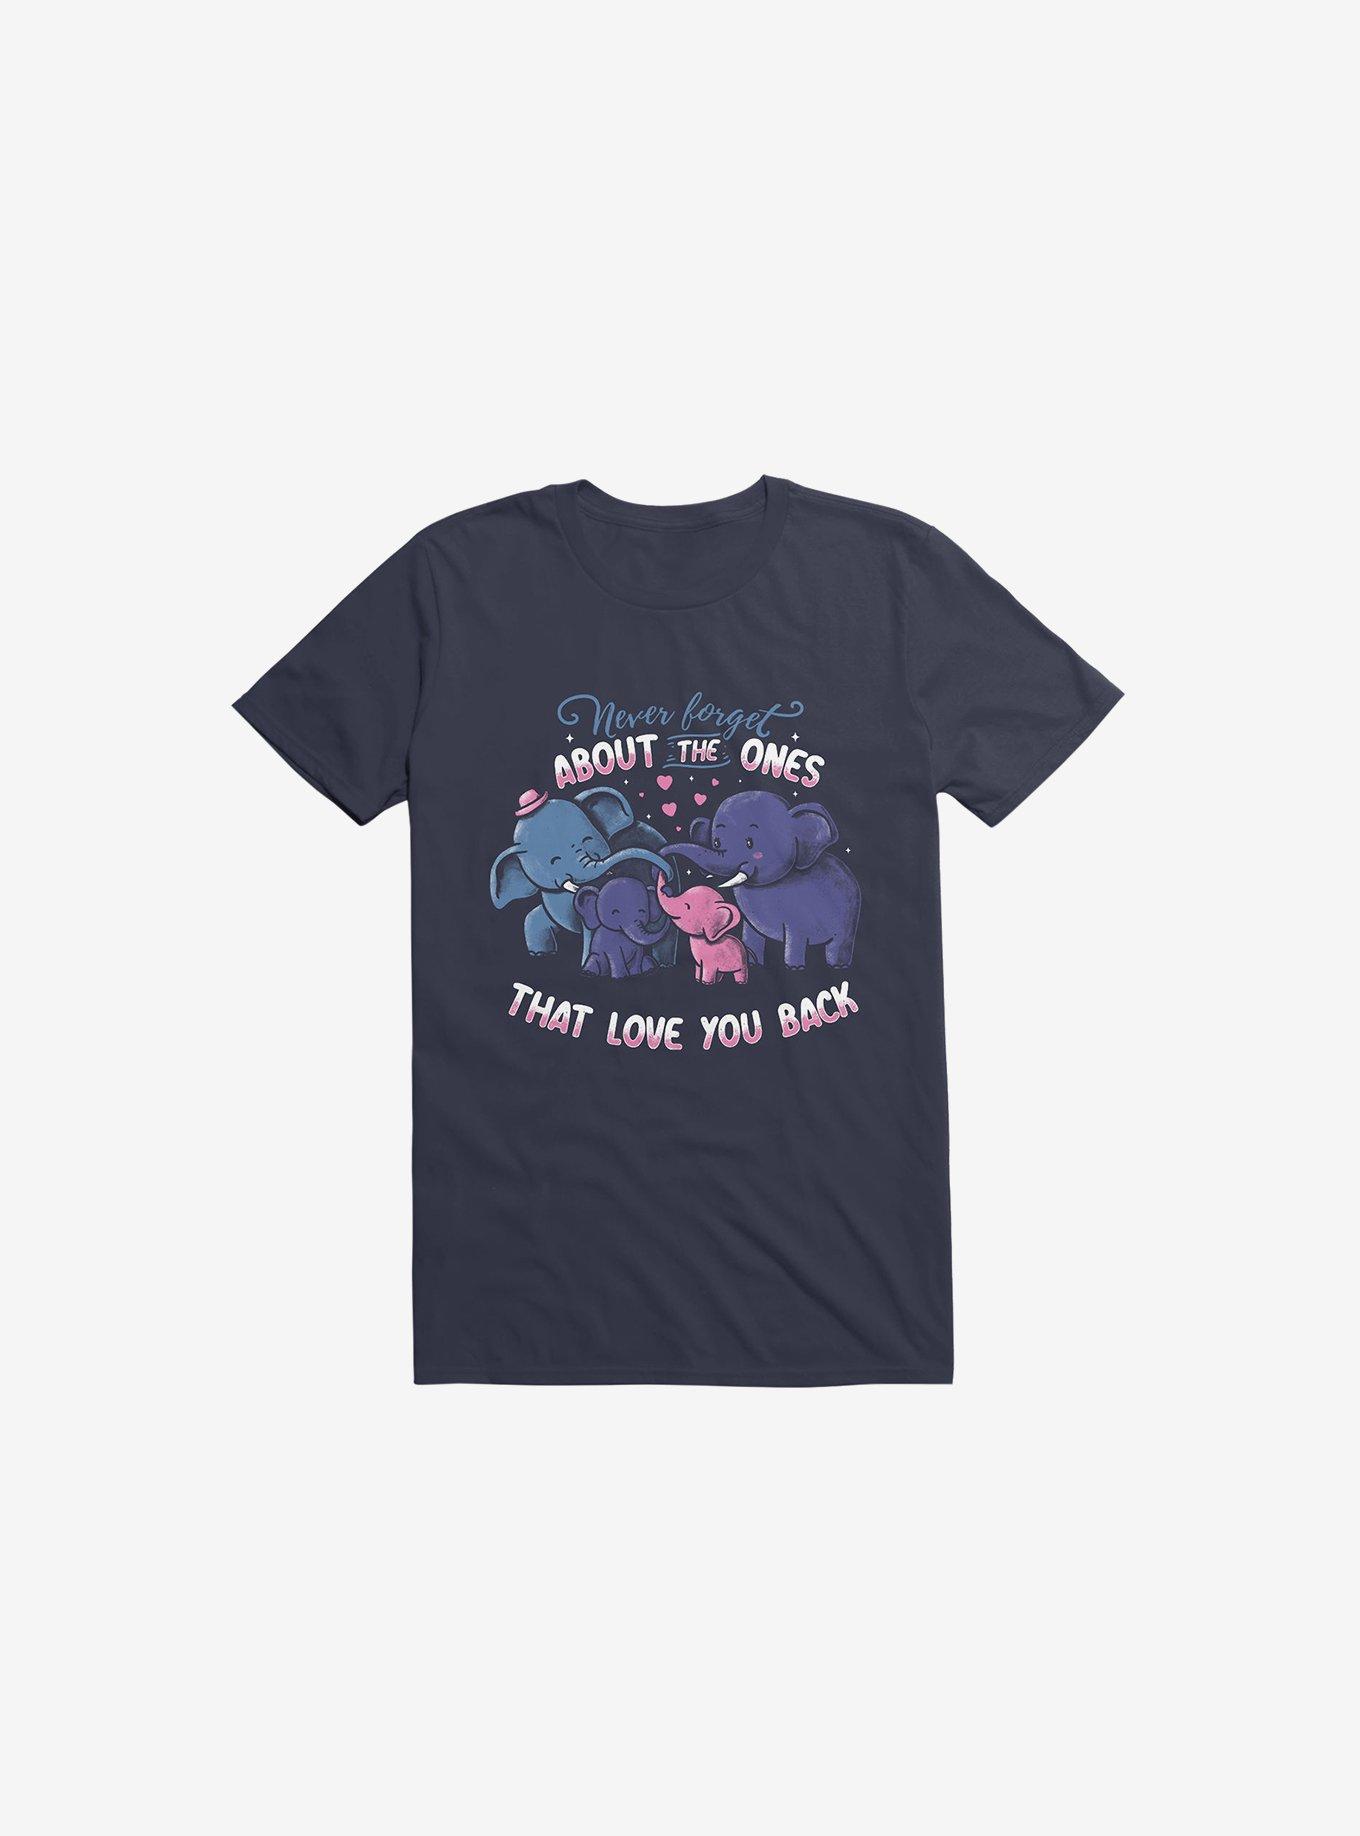 Never Forget About The Ones That Love You Back T-Shirt, NAVY, hi-res